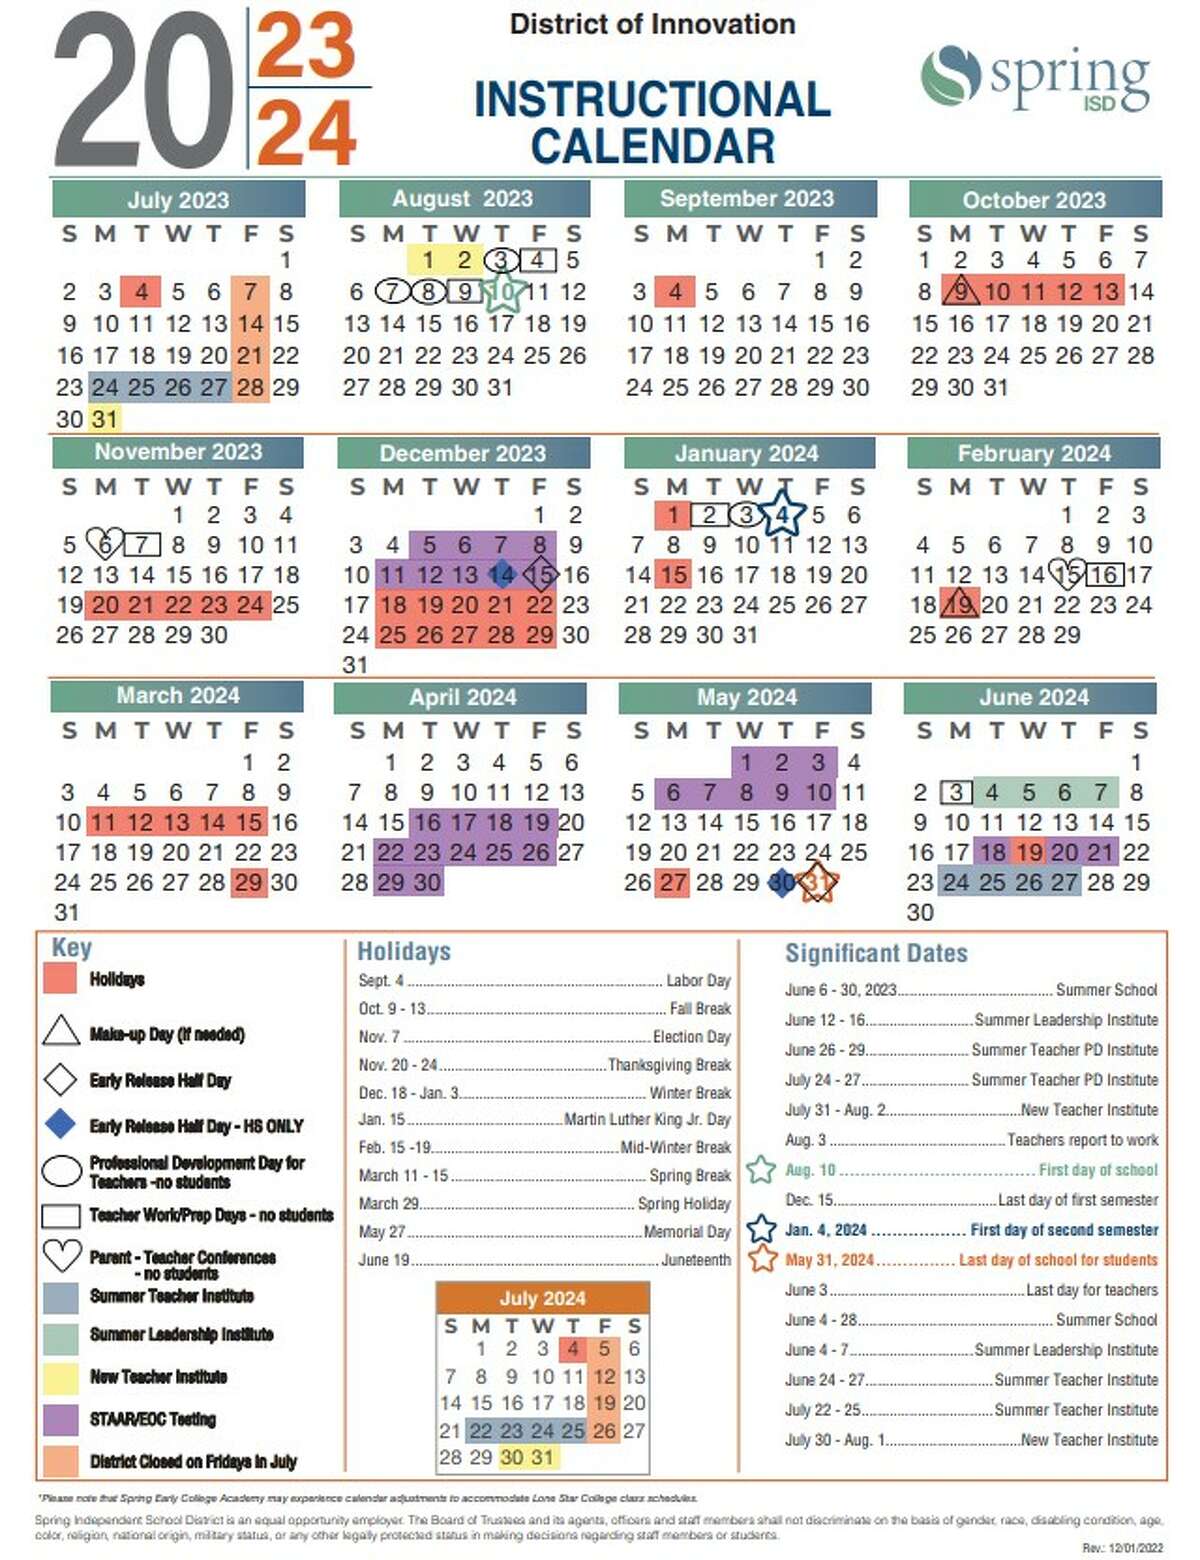 Spring ISD Approves Calendar For 2023 2024 School Year